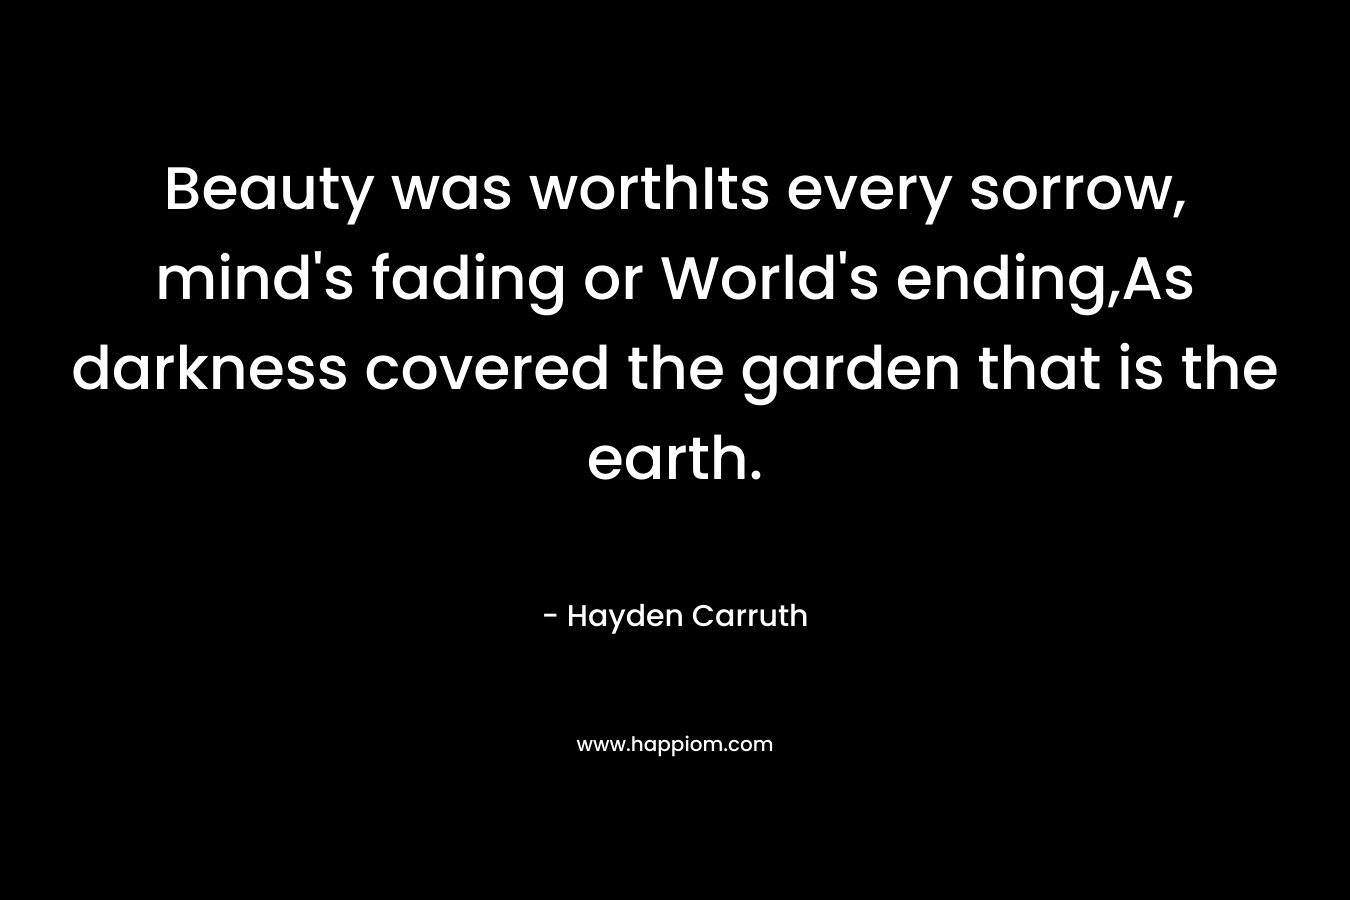 Beauty was worthIts every sorrow, mind's fading or World's ending,As darkness covered the garden that is the earth.